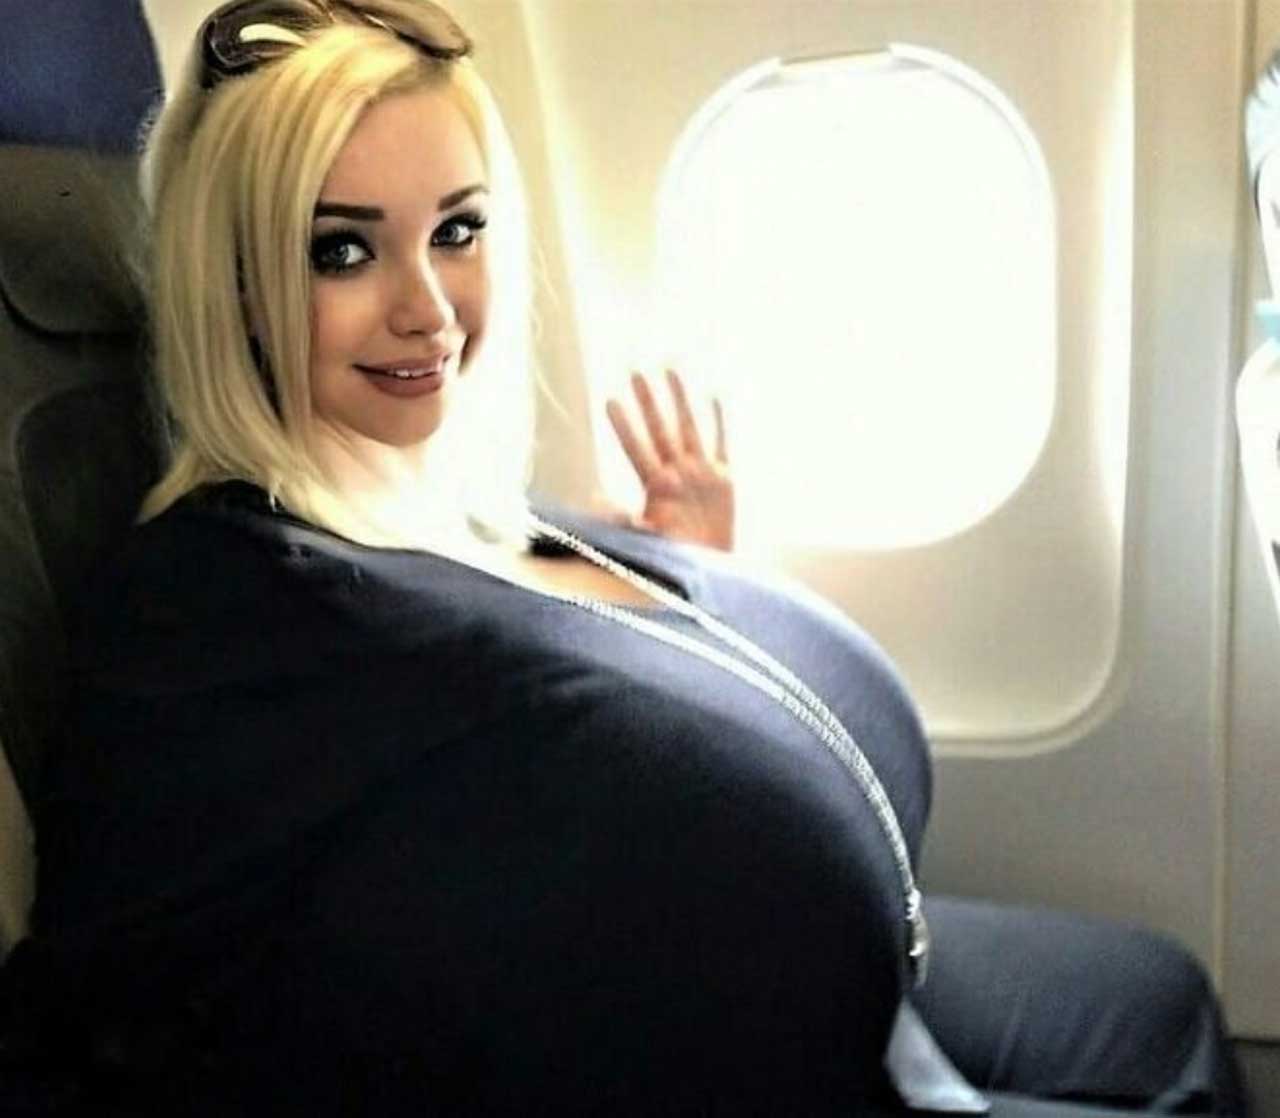 British model harassed on a plane for huge breasts that are bigger than her head